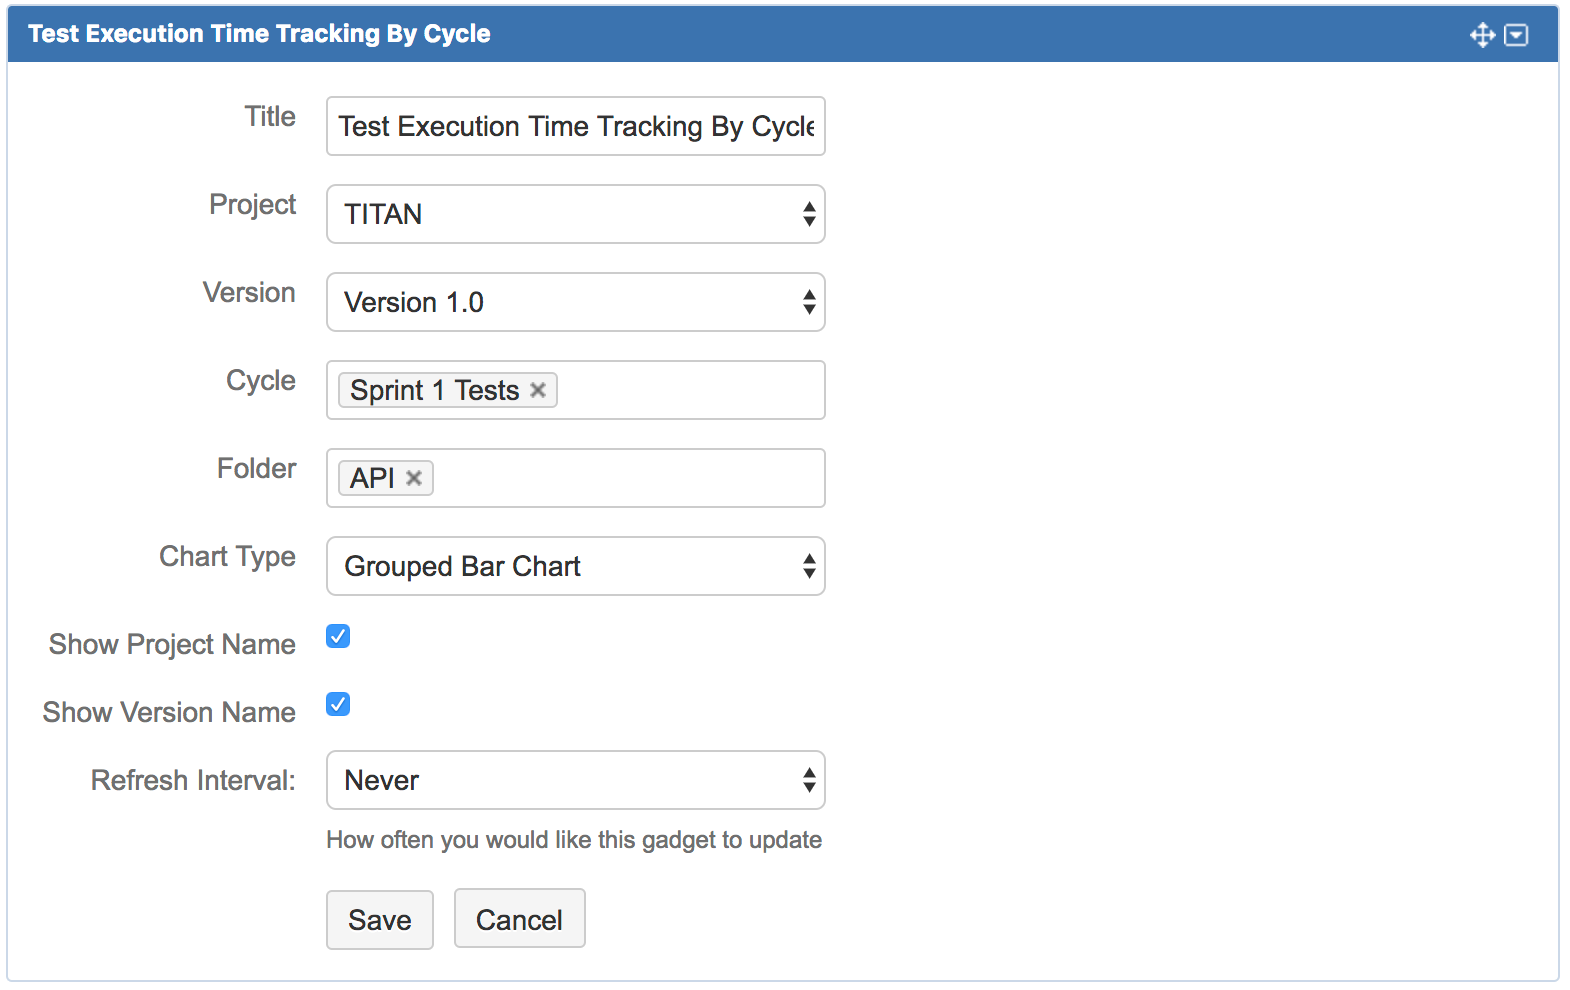 Editing test execution time tracking by cycle